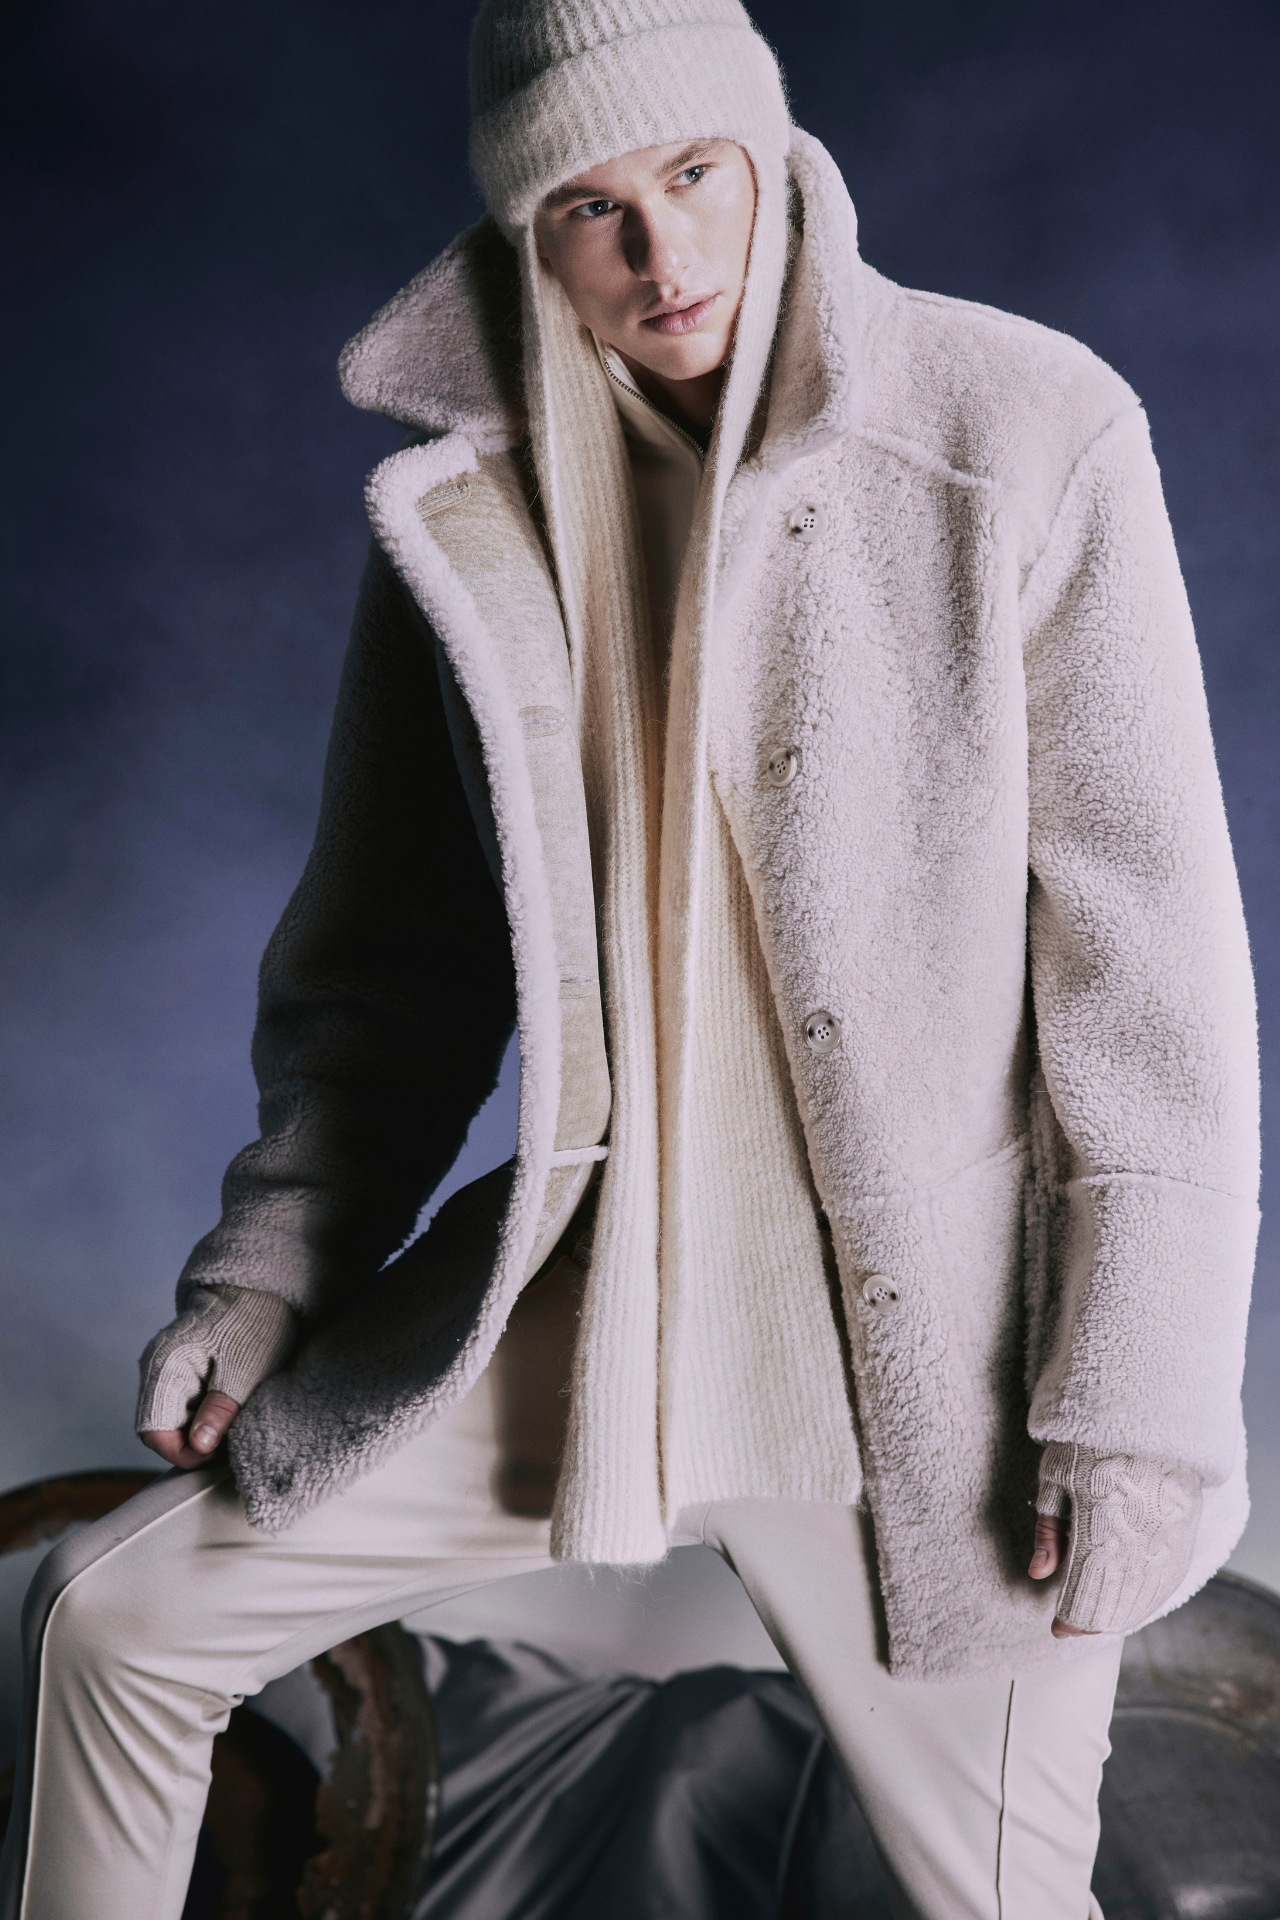 Enhance your winter wardrobe with Damien, our men’s vintage shearling coat. Crafted from supple sheepskin, this 33-inch jacket boasts a cozy curly wool teddy lining that ensures both warmth and style. The wool out detail, button closure, and patch pockets add practicality and flair. Whether you’re braving chilly days or seeking timeless design, Damien delivers the ultimate outerwear experience.